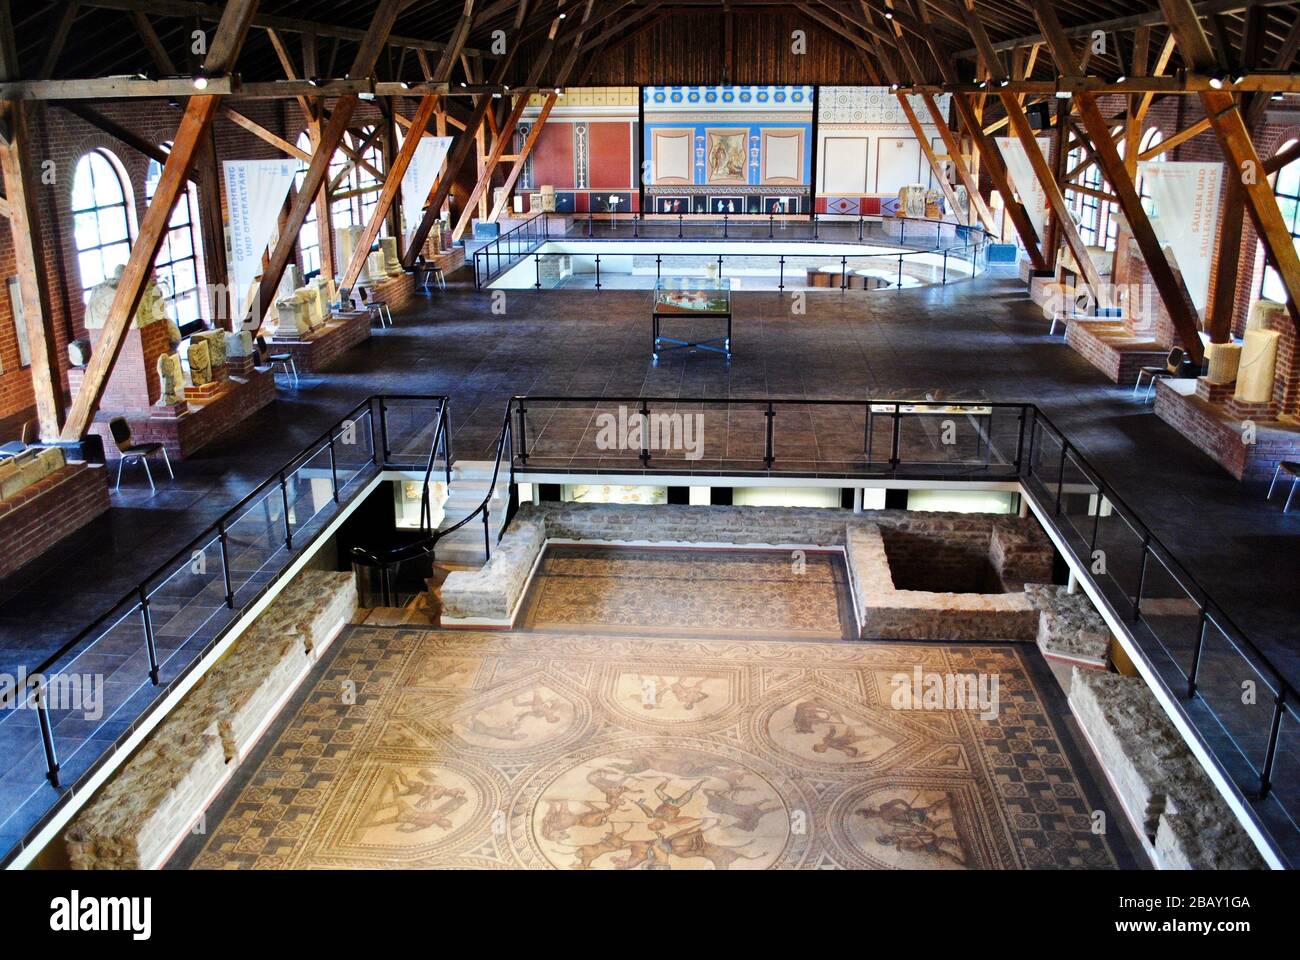 BAD KRUEZNACH, GERMANY: Römerhalle (Roman Hall) Museum features two large Roman mosaic floors from a Villa Rustica (countryside villa). Stock Photo